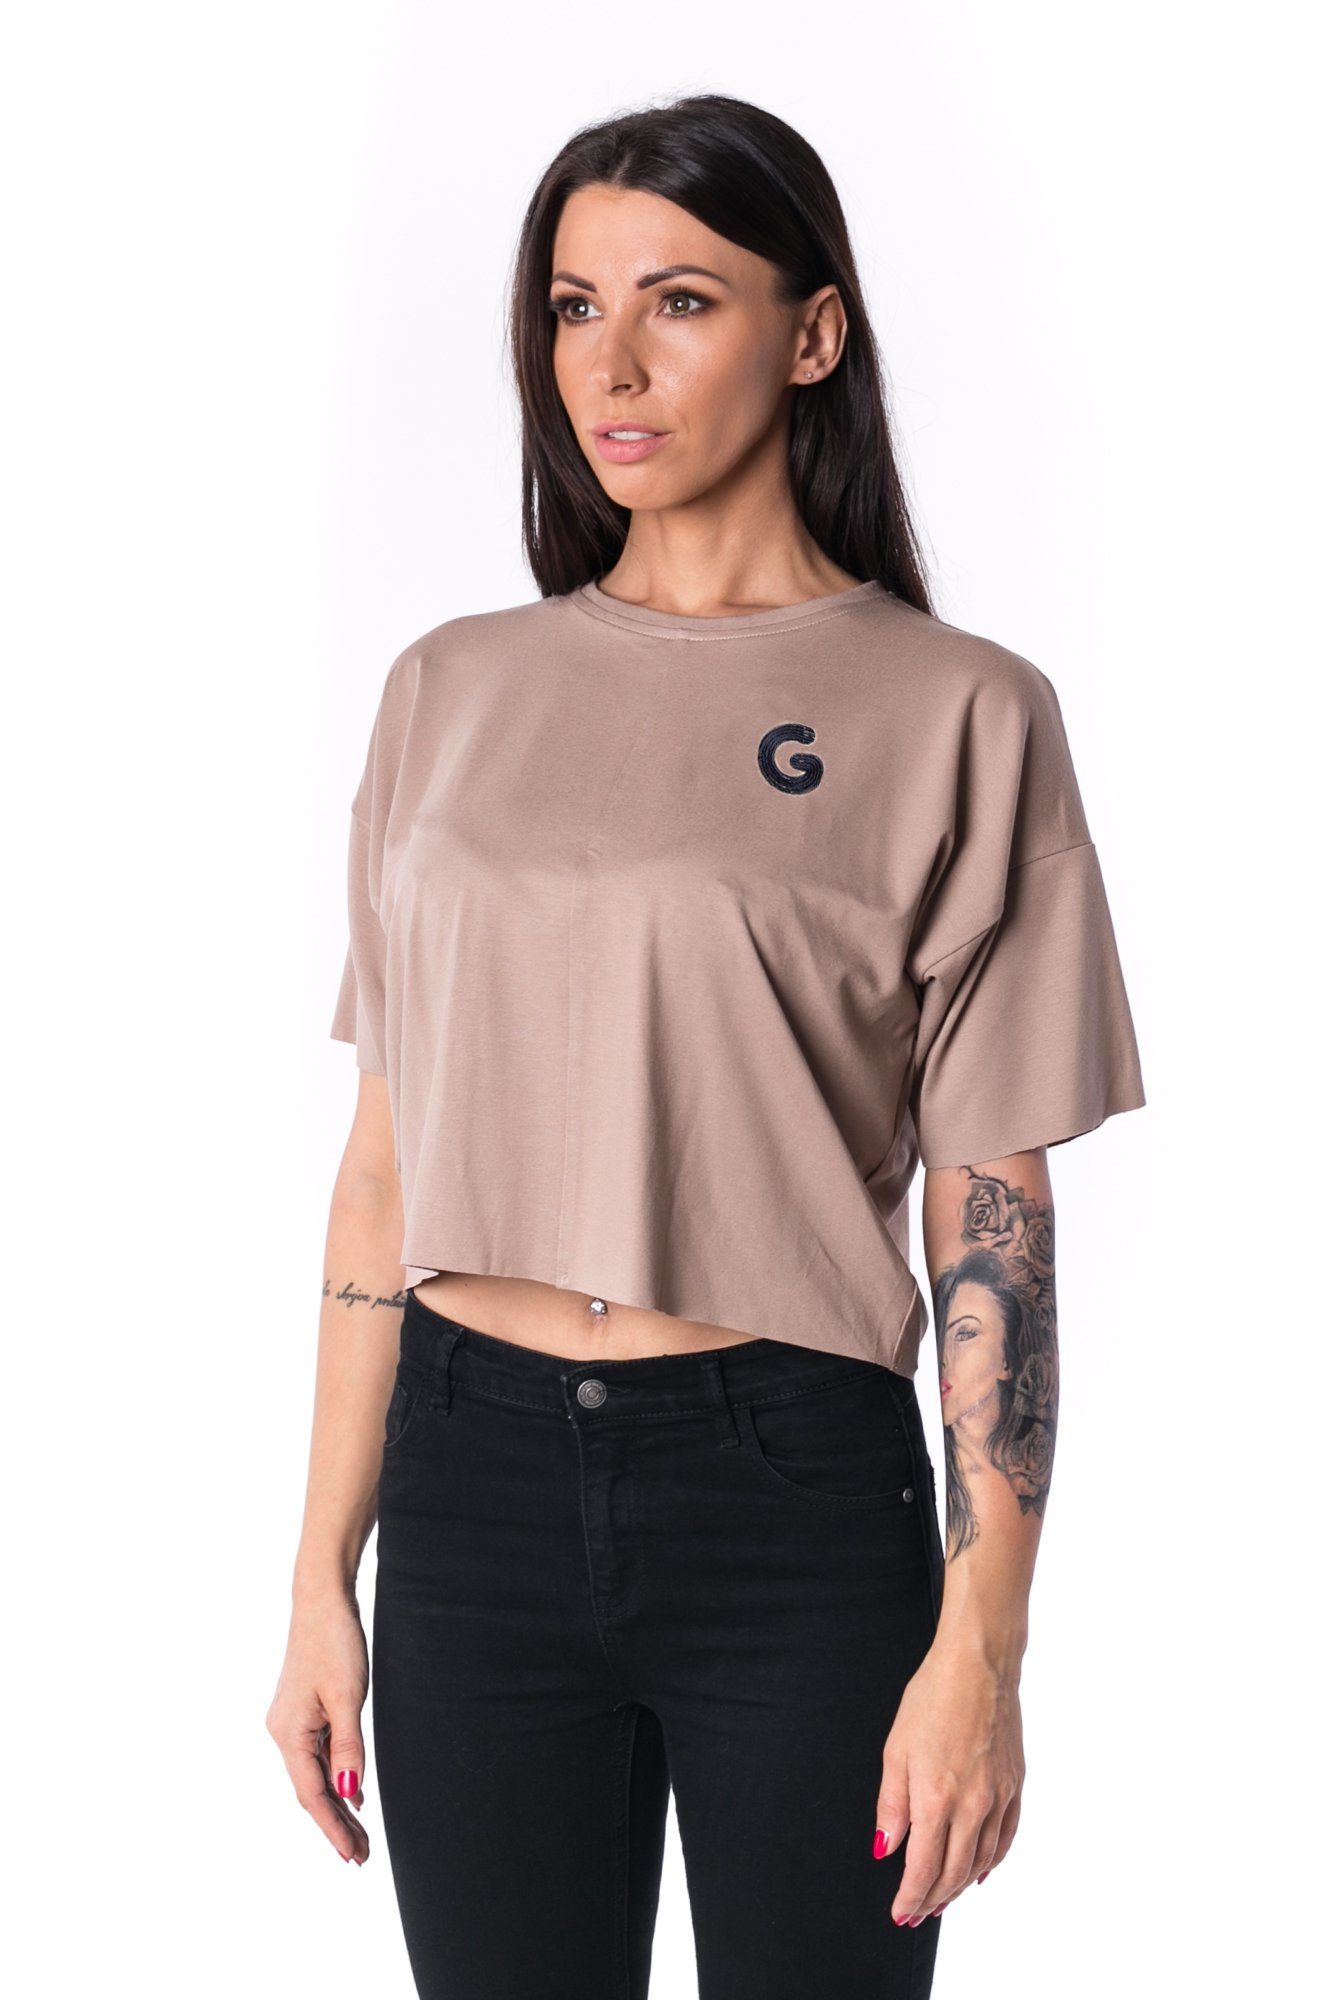 TheG Woman Panelled Oversize Crop Tee 17 // mocca